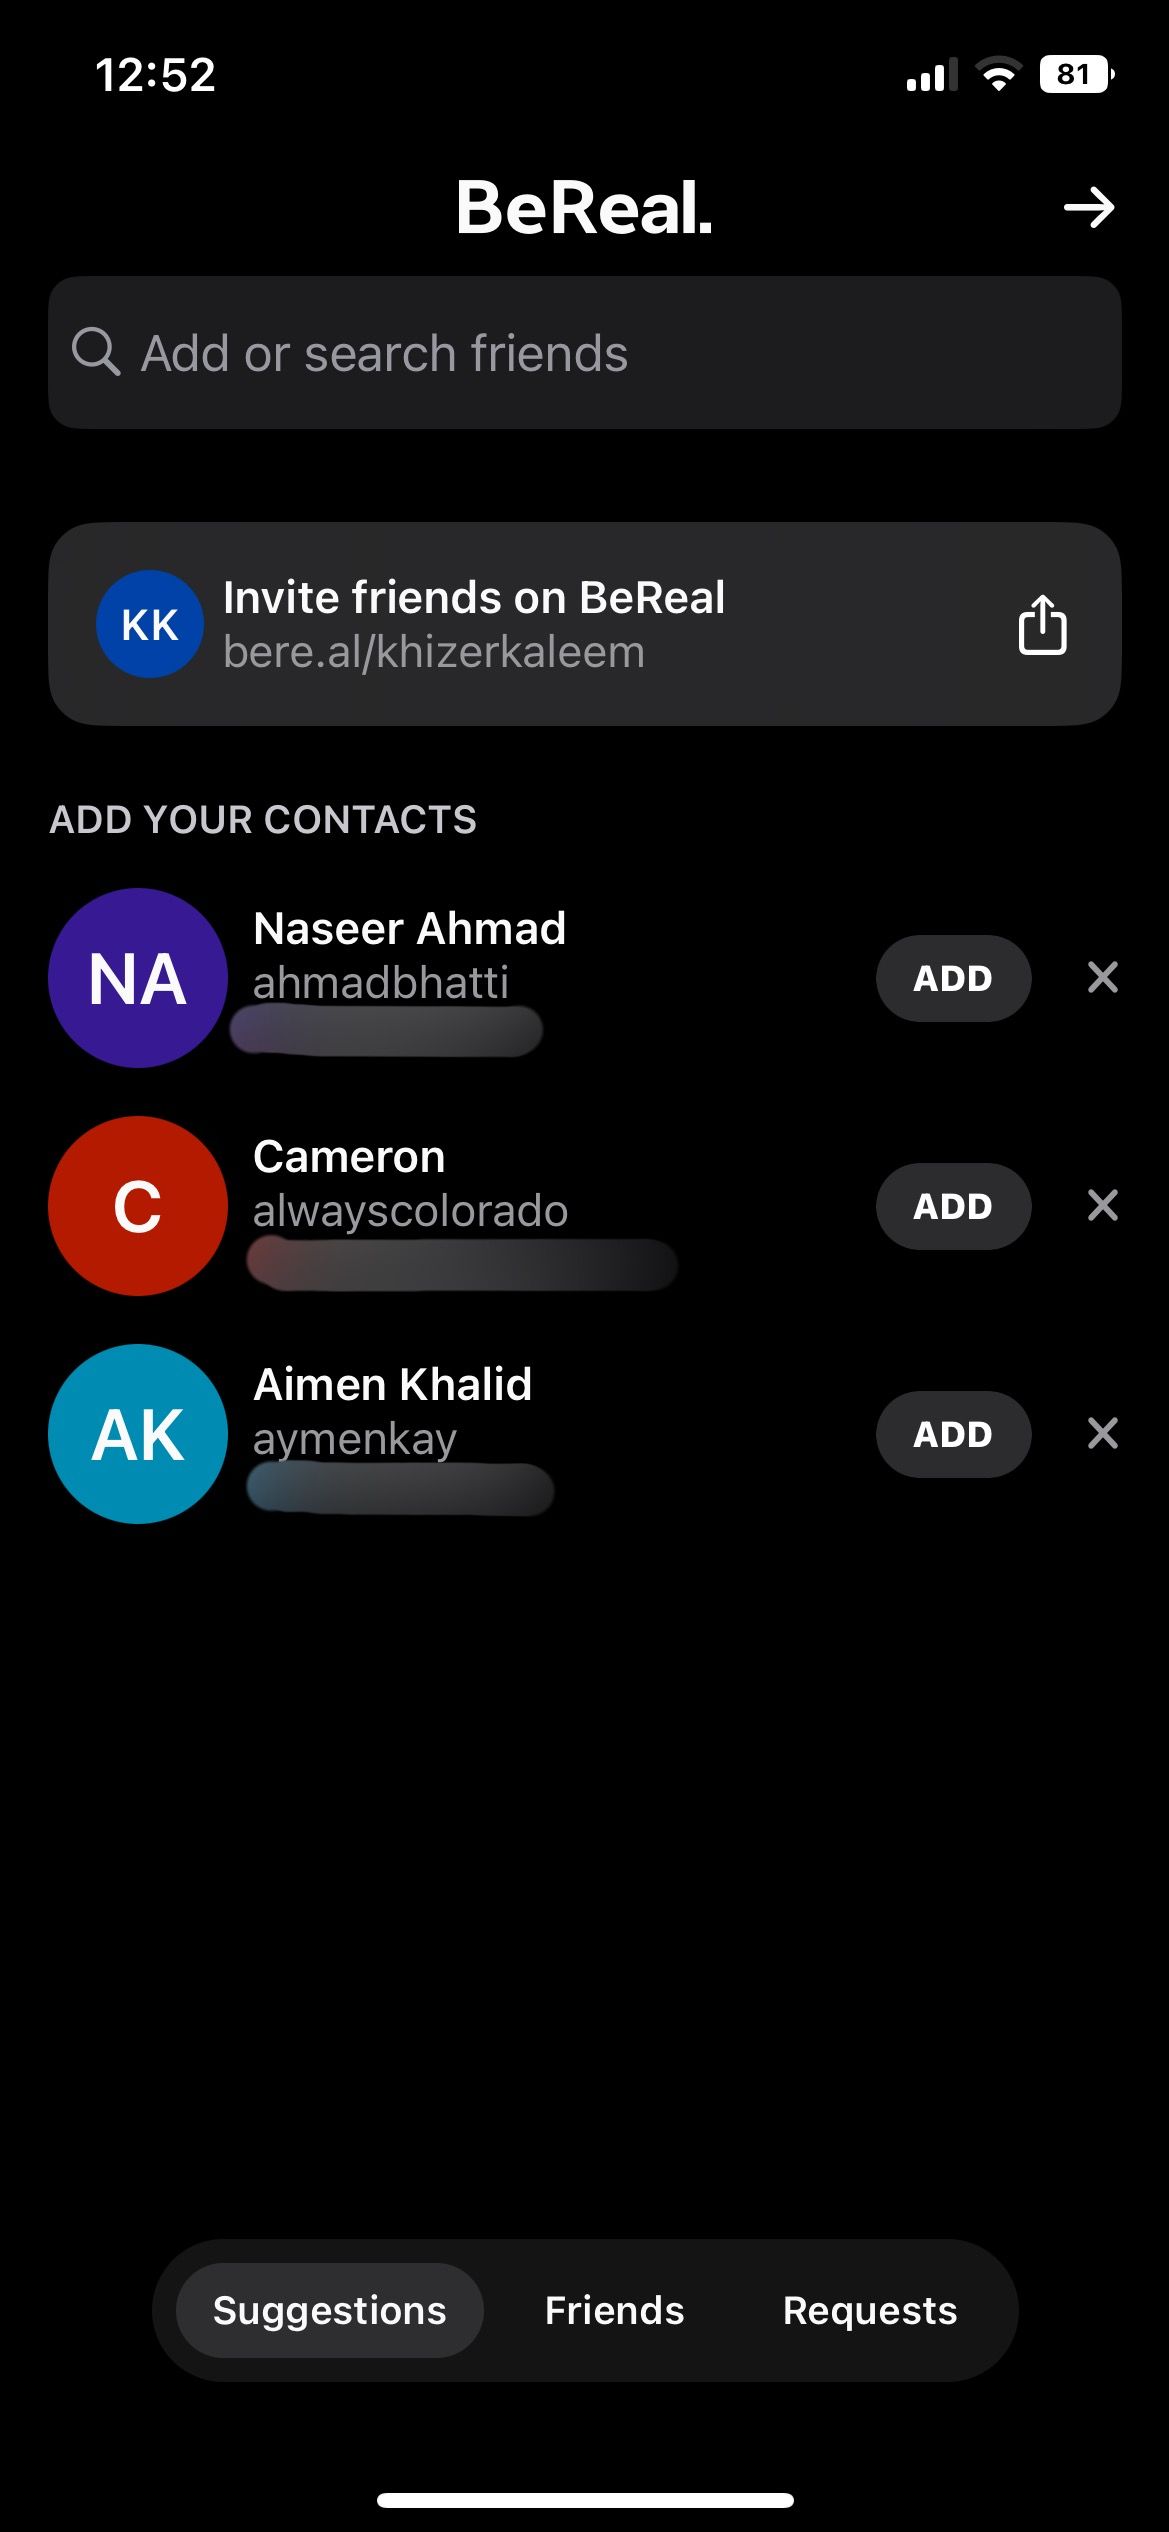 Add your contacts on BeReal